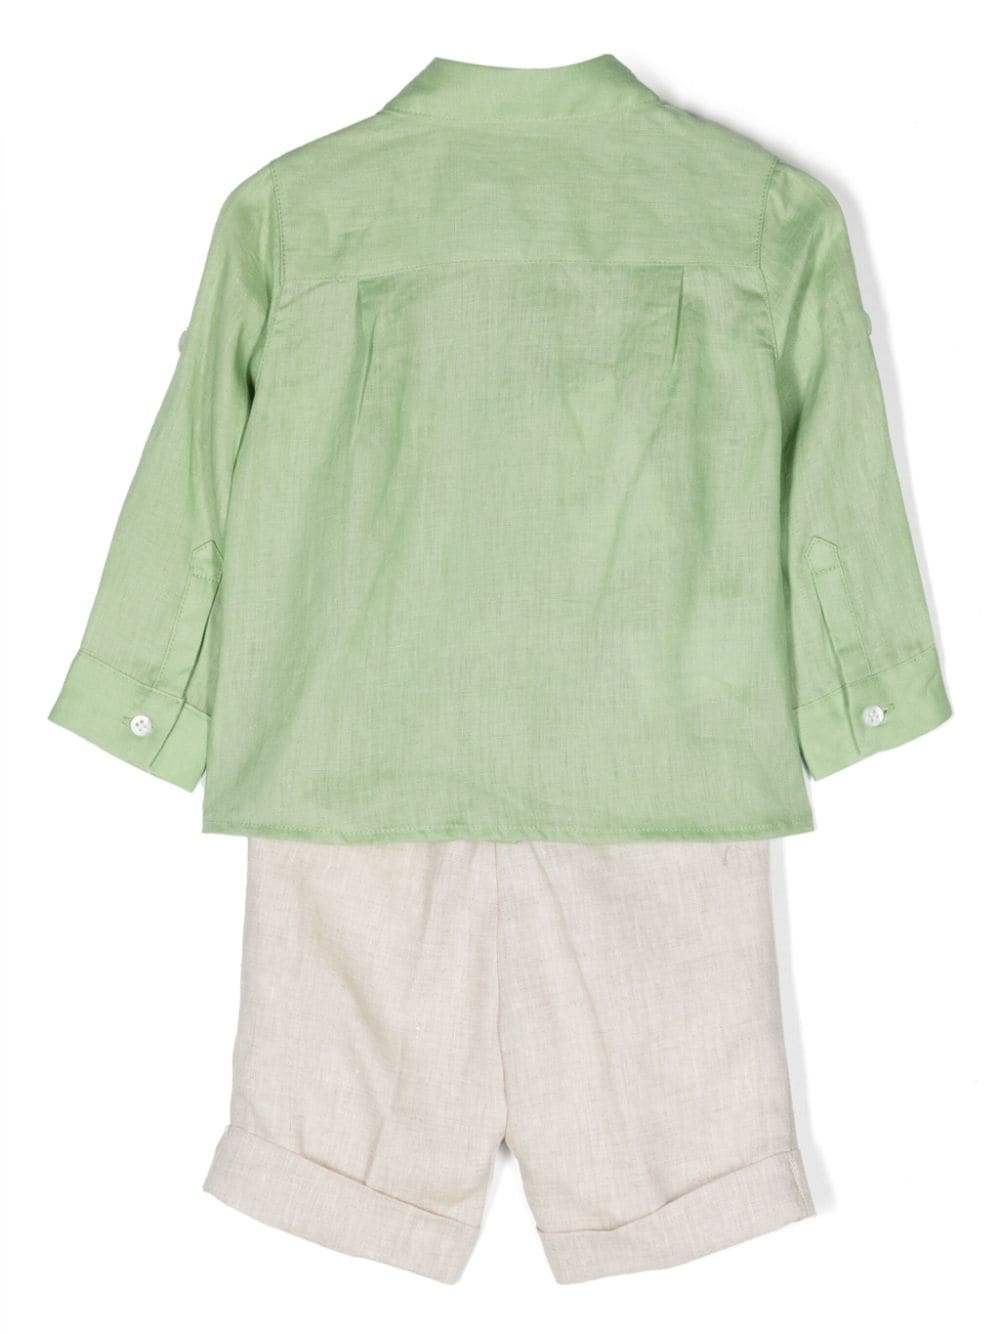 Elegant green and beige outfit for newborns